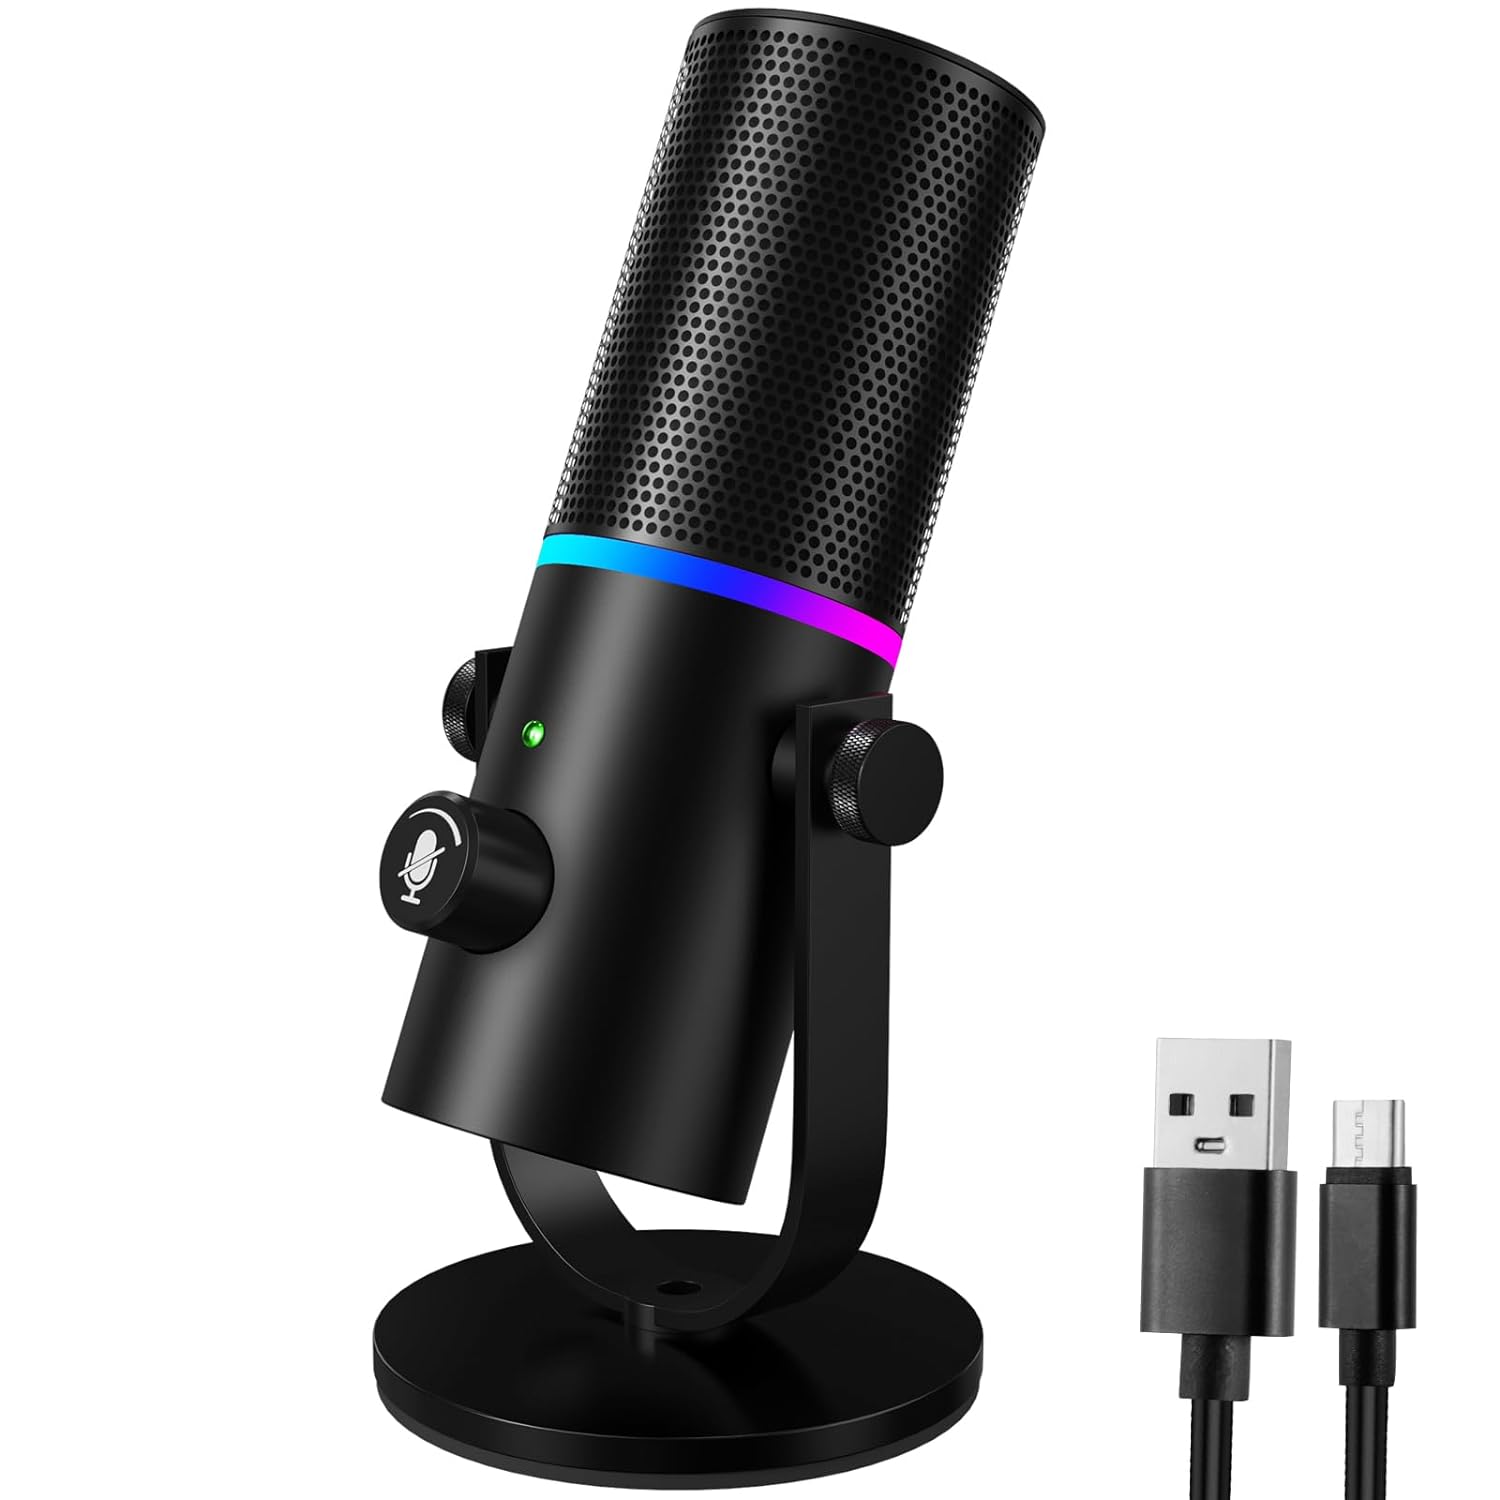 Czgor USB Microphone Gaming with RGB Light, Mute Button, Headphones Jack, Desktop Stand, Noise Reduction, USB-C Output for Gaming, Streaming, Podcast, Chatting, Mac & PC,Windows